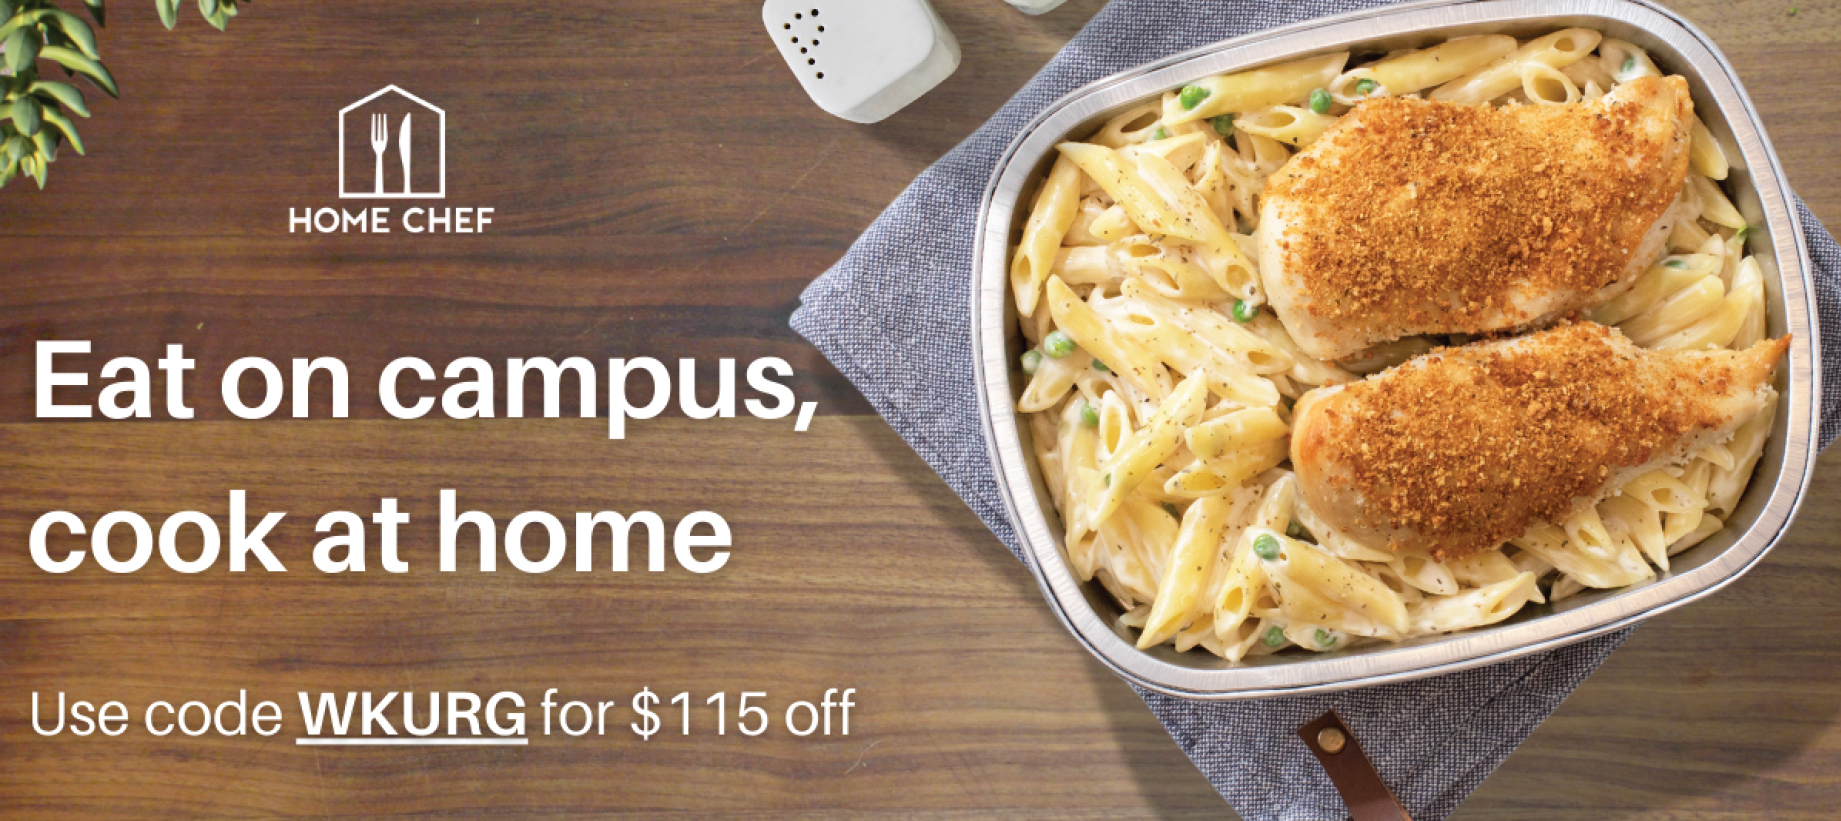 Click here to redeem your Home Chef offer!